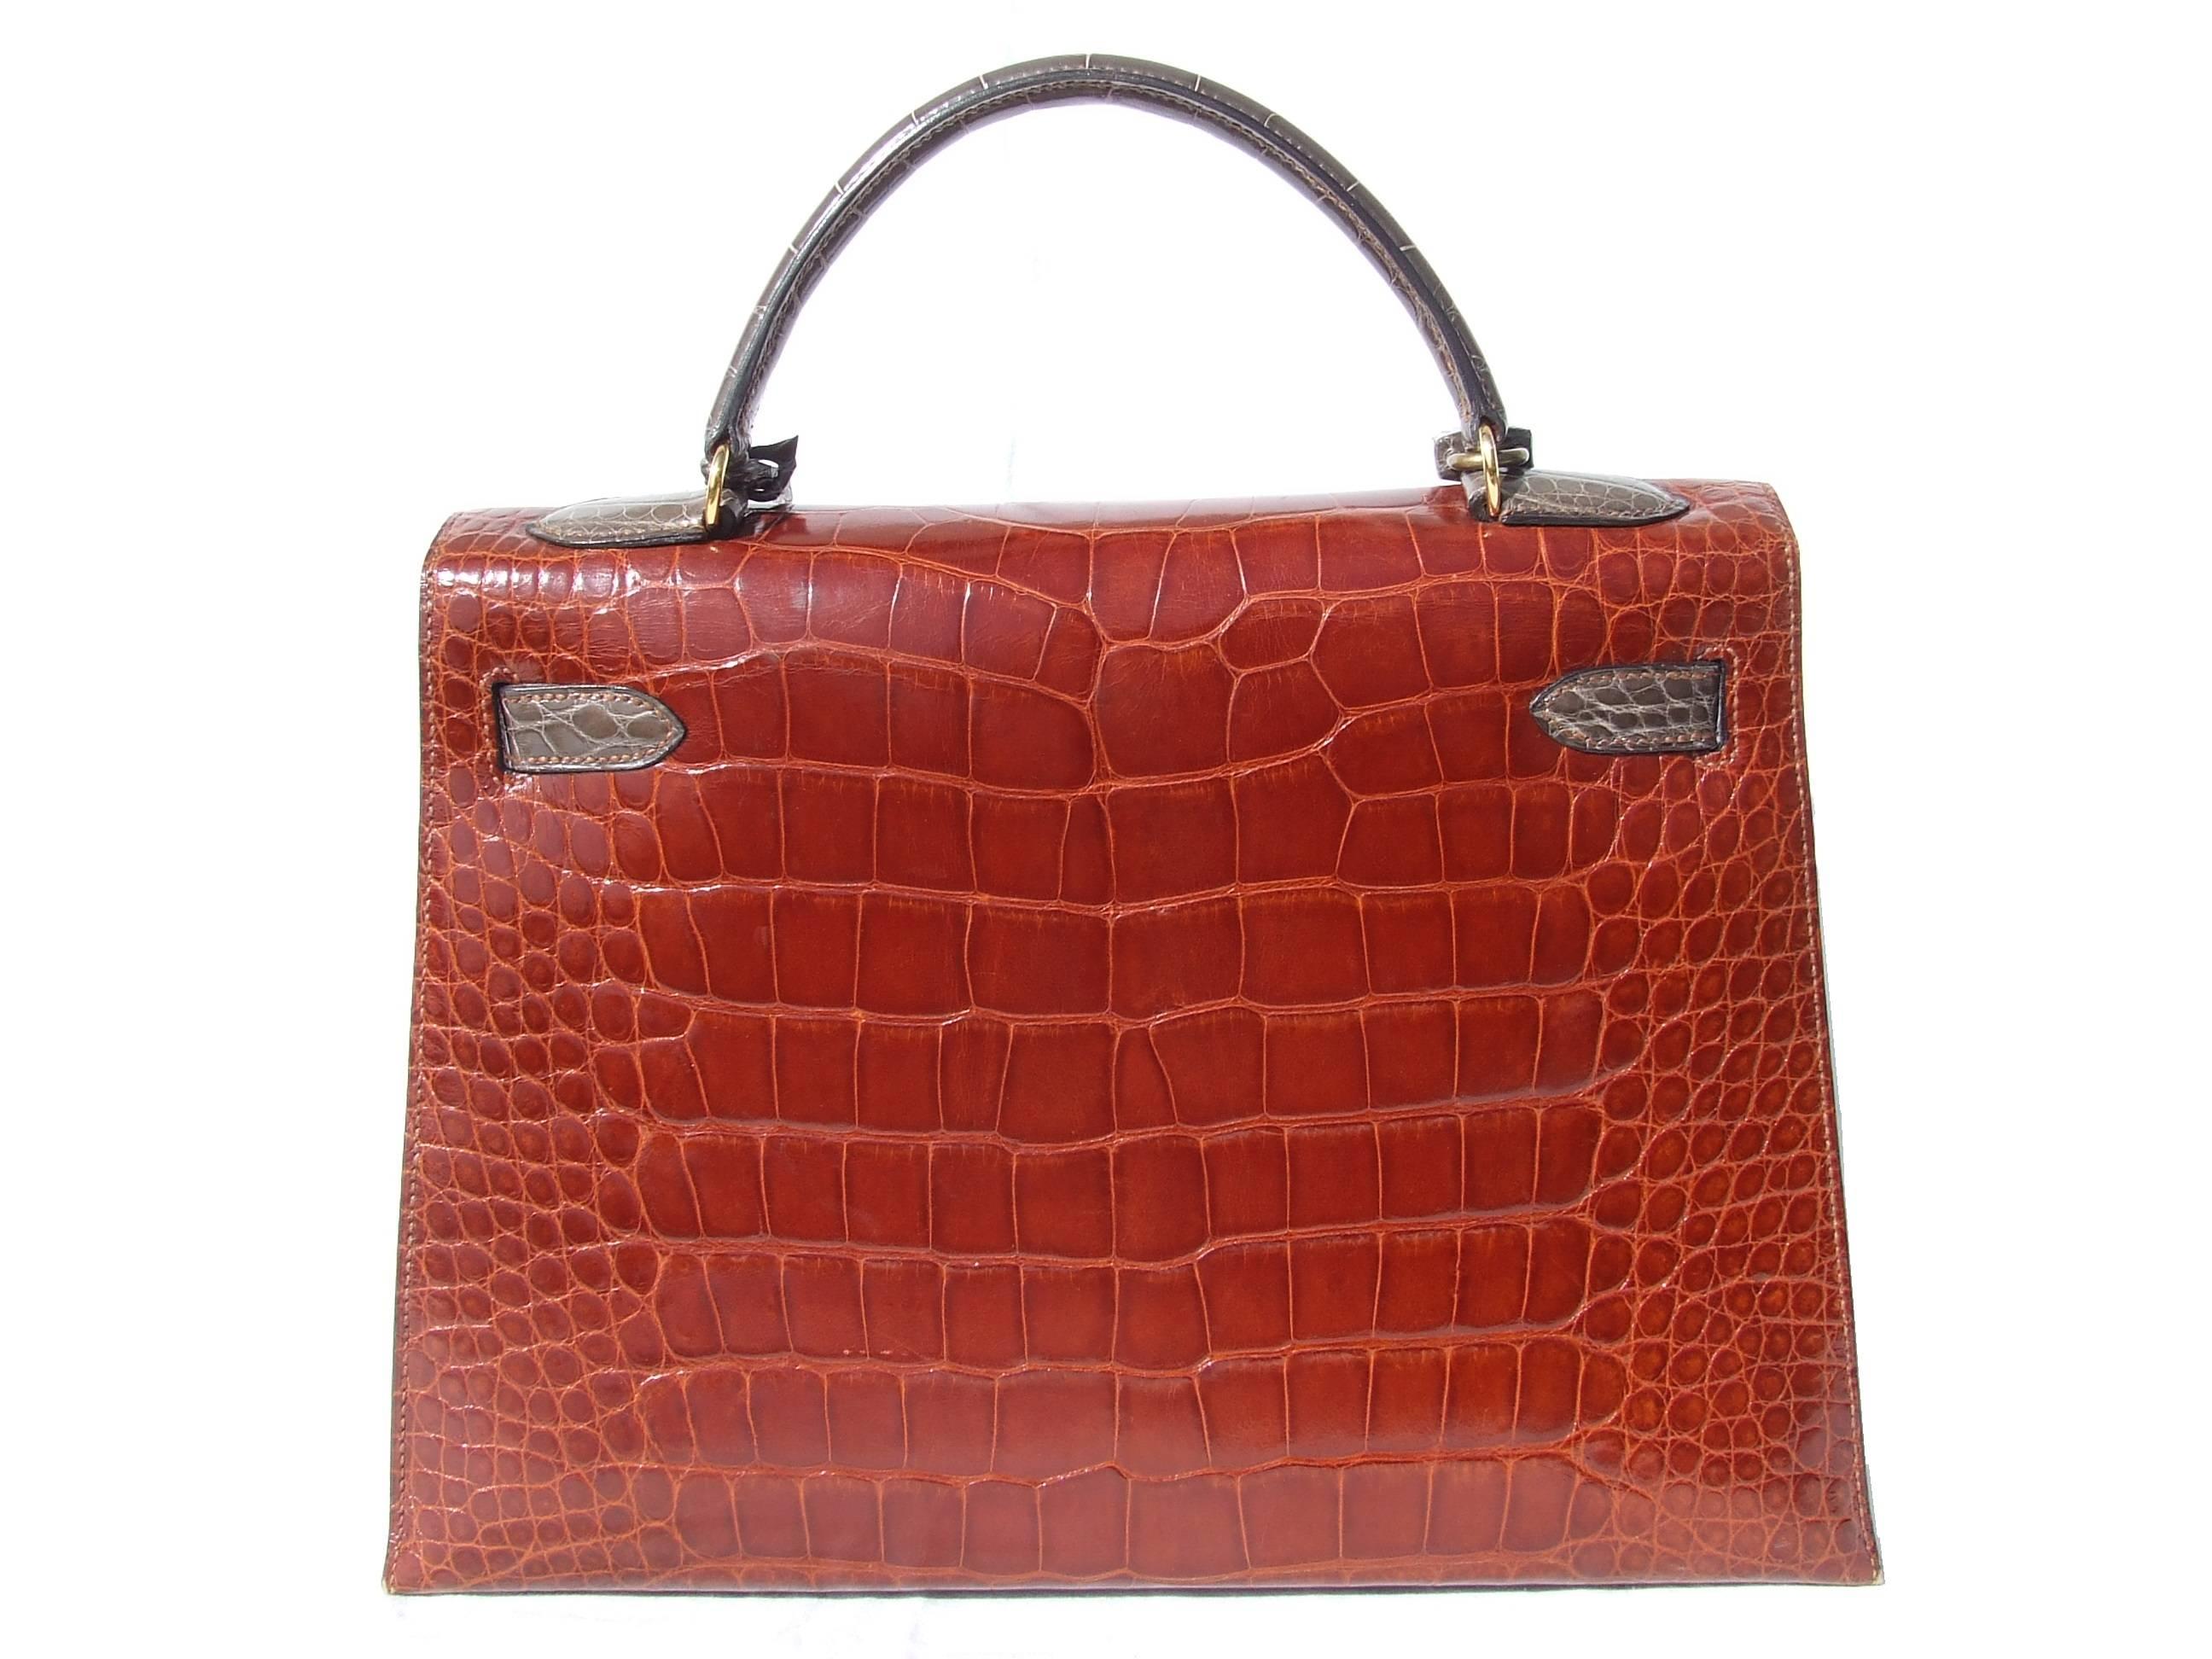 Amazingly Gorgeous Authentic Hermès Kelly Bag

Extremely Rare, this bag is a collector piece, a must-have !

Made in France

Stamp T in circle for 1990

Made of Alligator and Golden Hardware

Colorways: Front Beige / Flap and Back in Etrusque (Kind